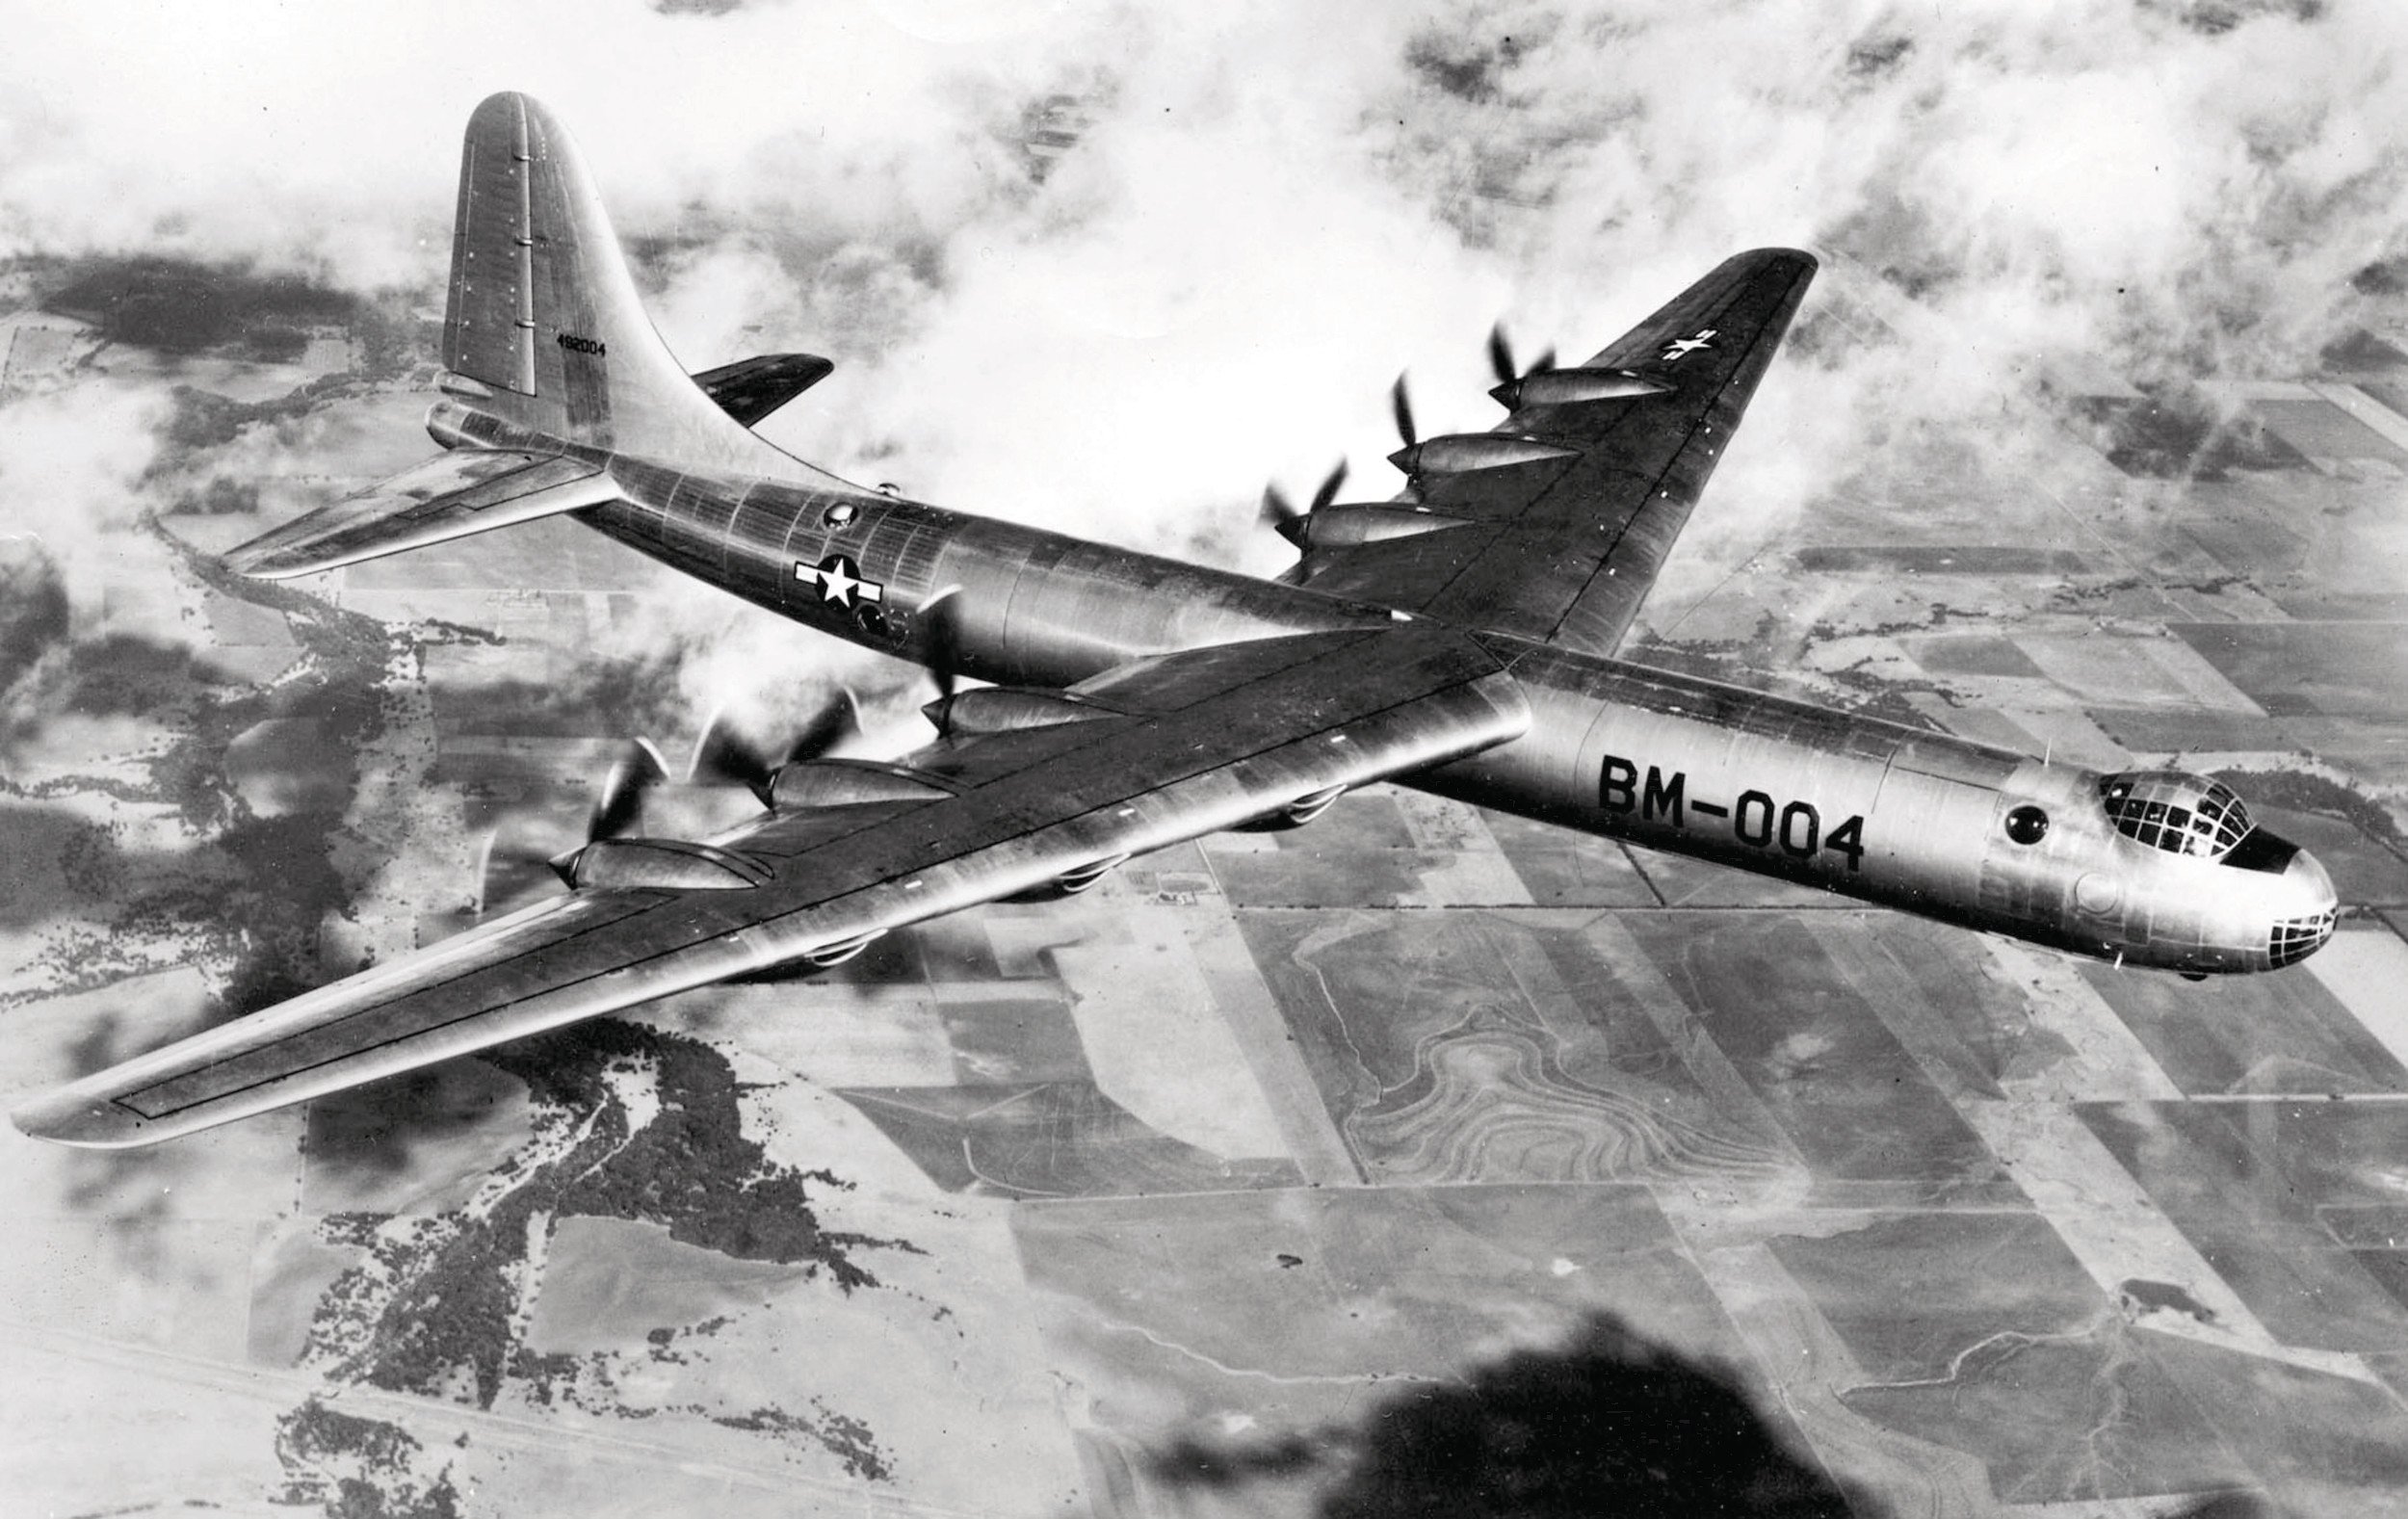 Commemorative Air Force - Compared to the B-29, the B-36 Peacemaker was a  massive aircraft, but to be fair, compared to nearly ANY aircraft the B-36  is massive! The Convair B-36 entered